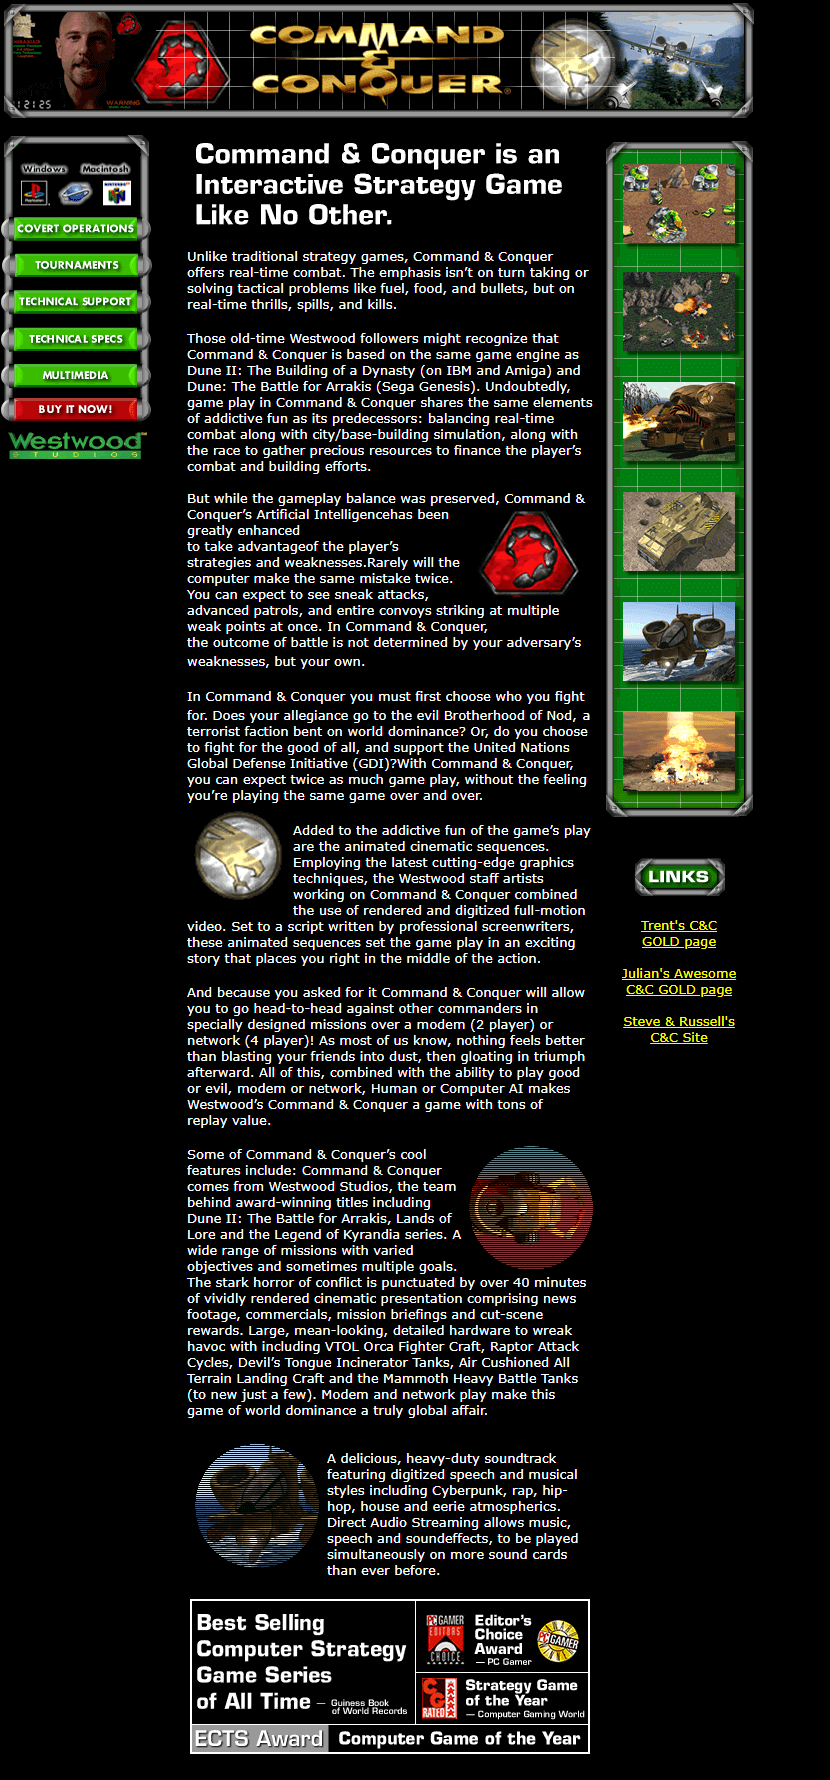 Command & Conquer in 2000